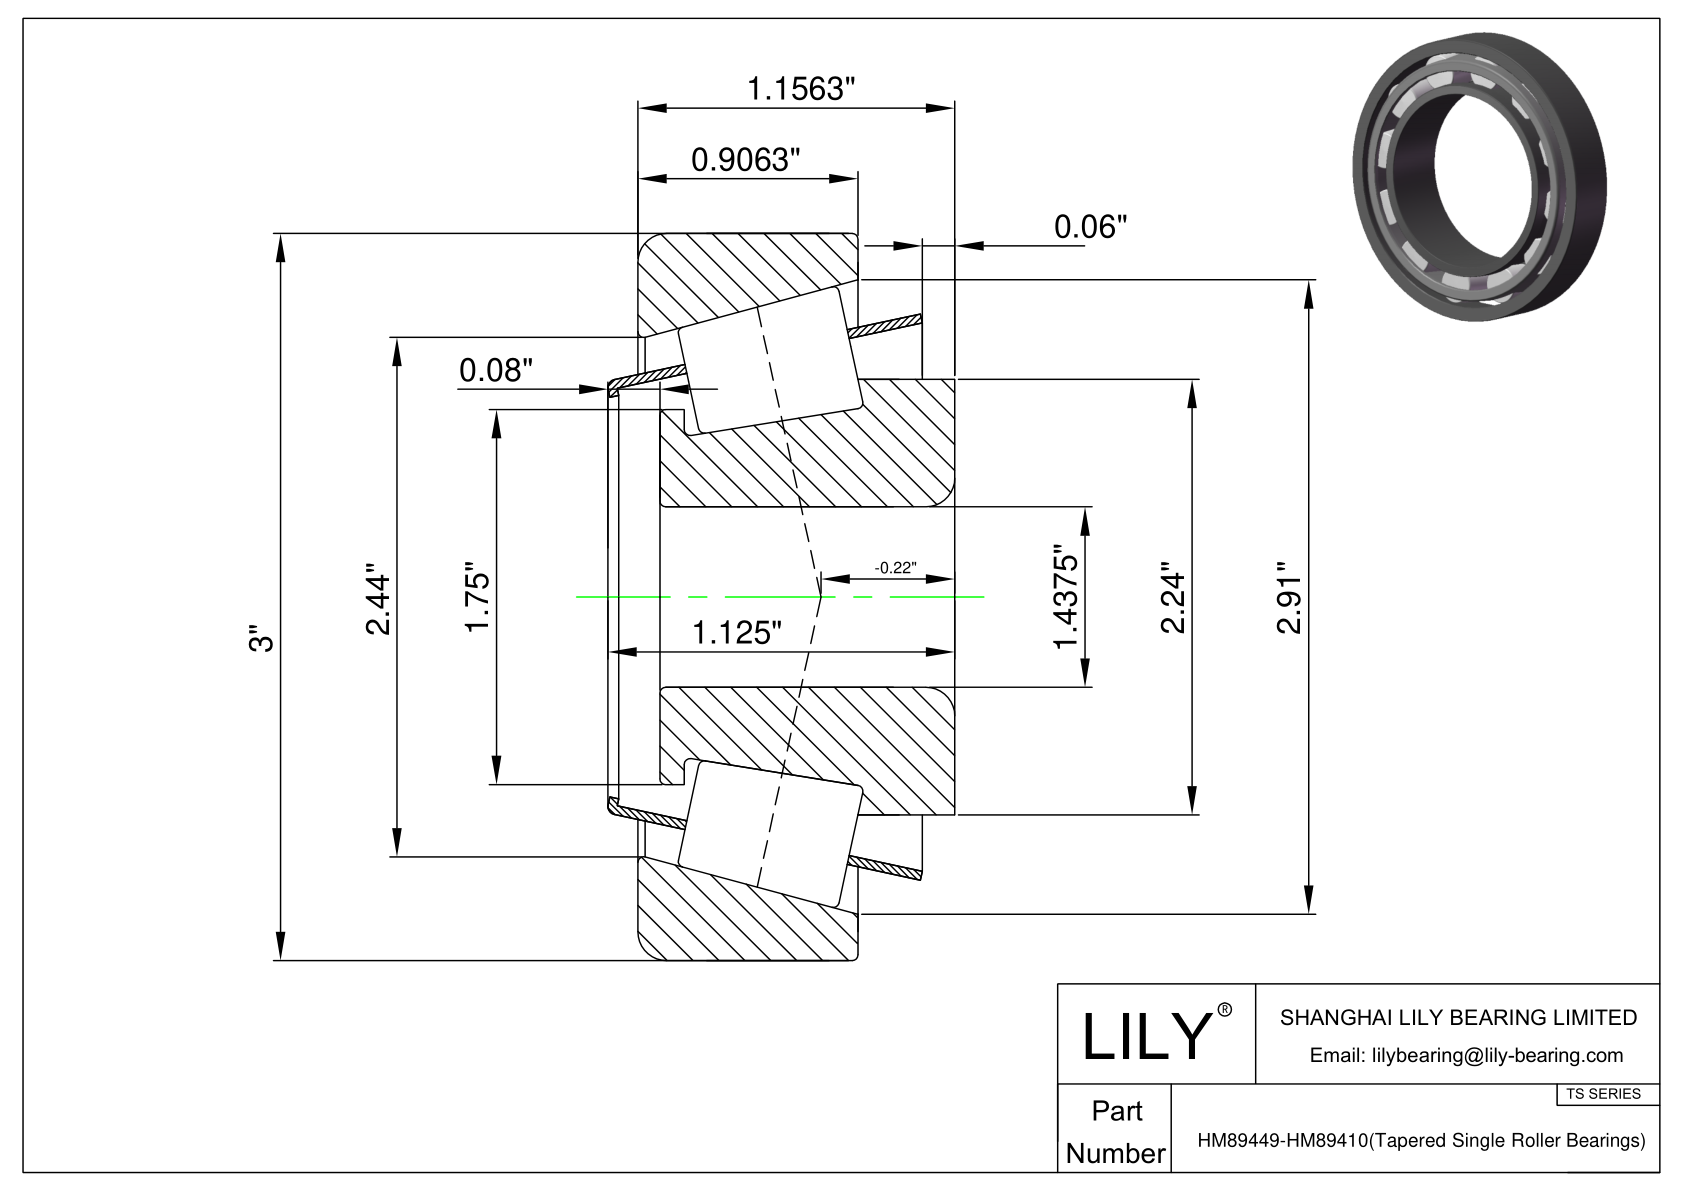 HM89449-HM89410 TS (Tapered Single Roller Bearings) (Imperial) cad drawing